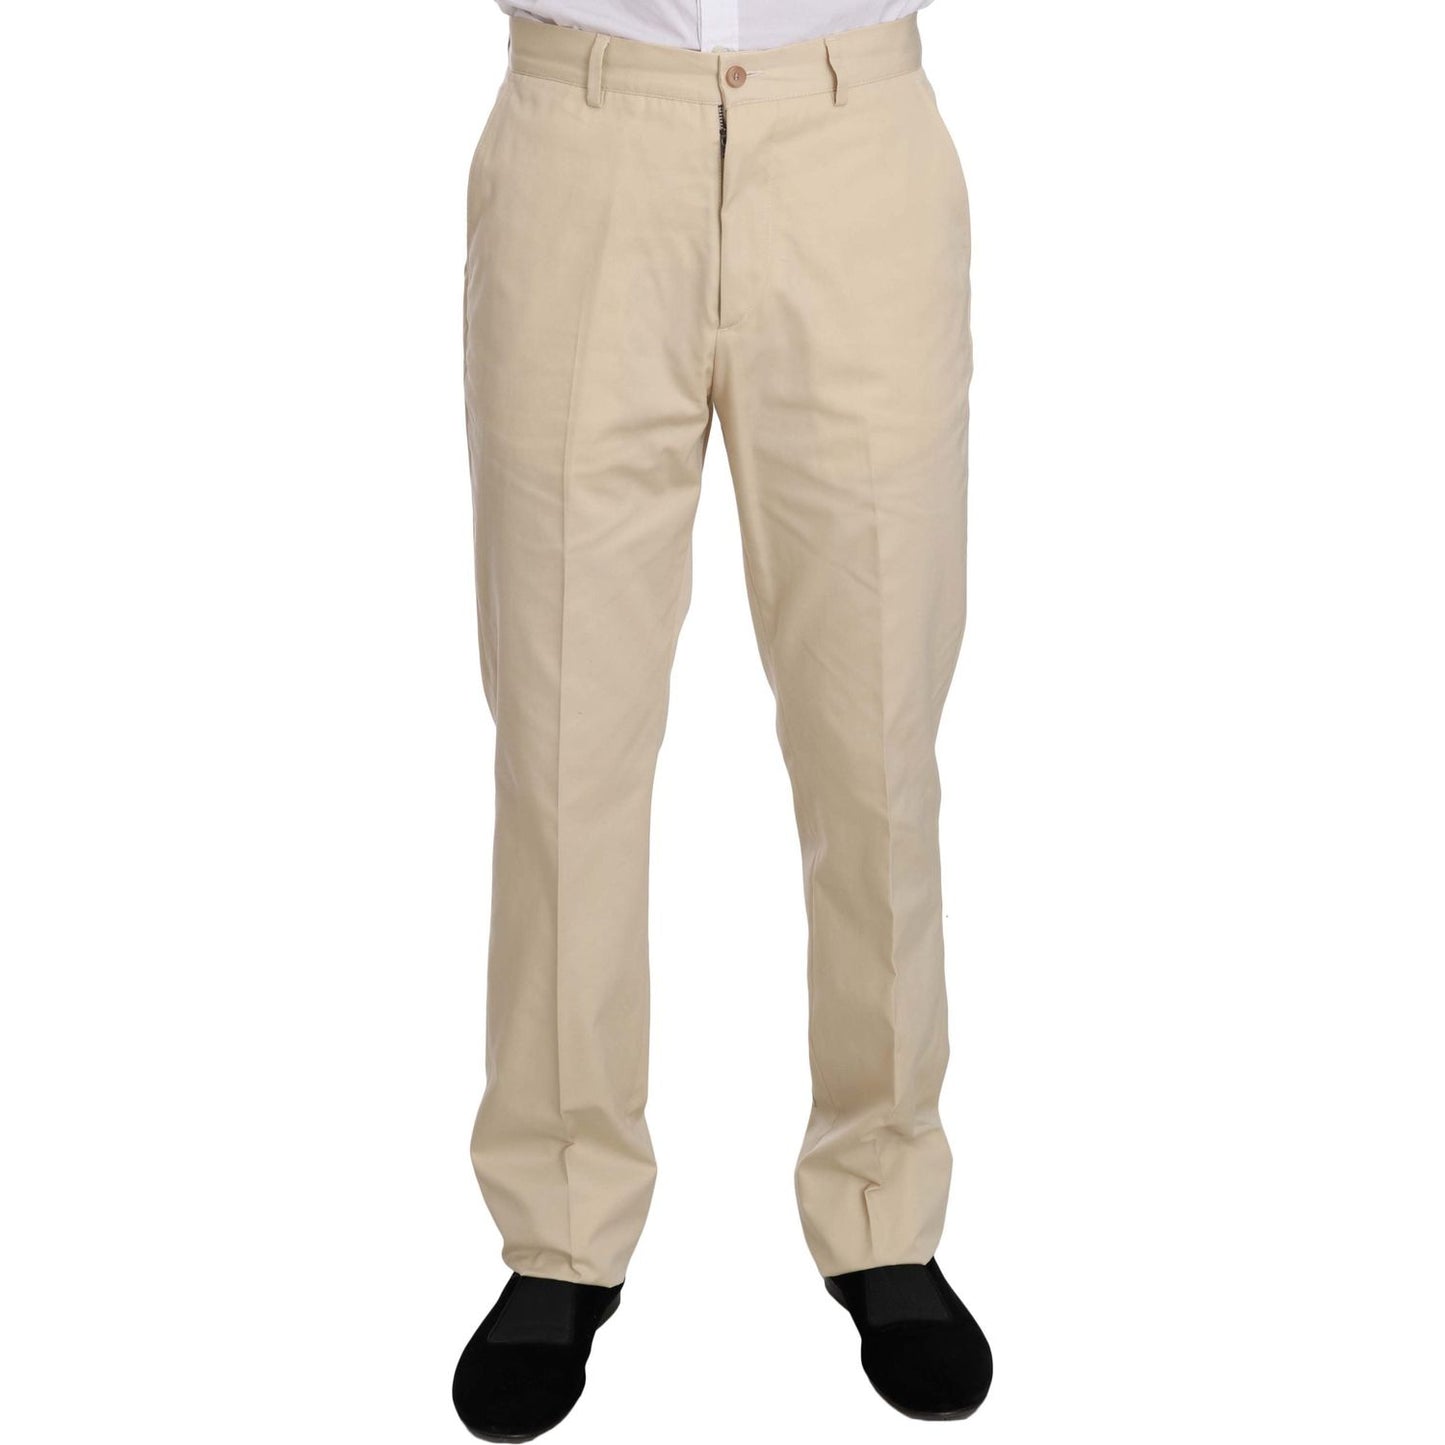 Romeo Gigli Beige Two-Piece Suit with Classic Elegance Suit two-piece-3-button-beige-cotton-solid-suit